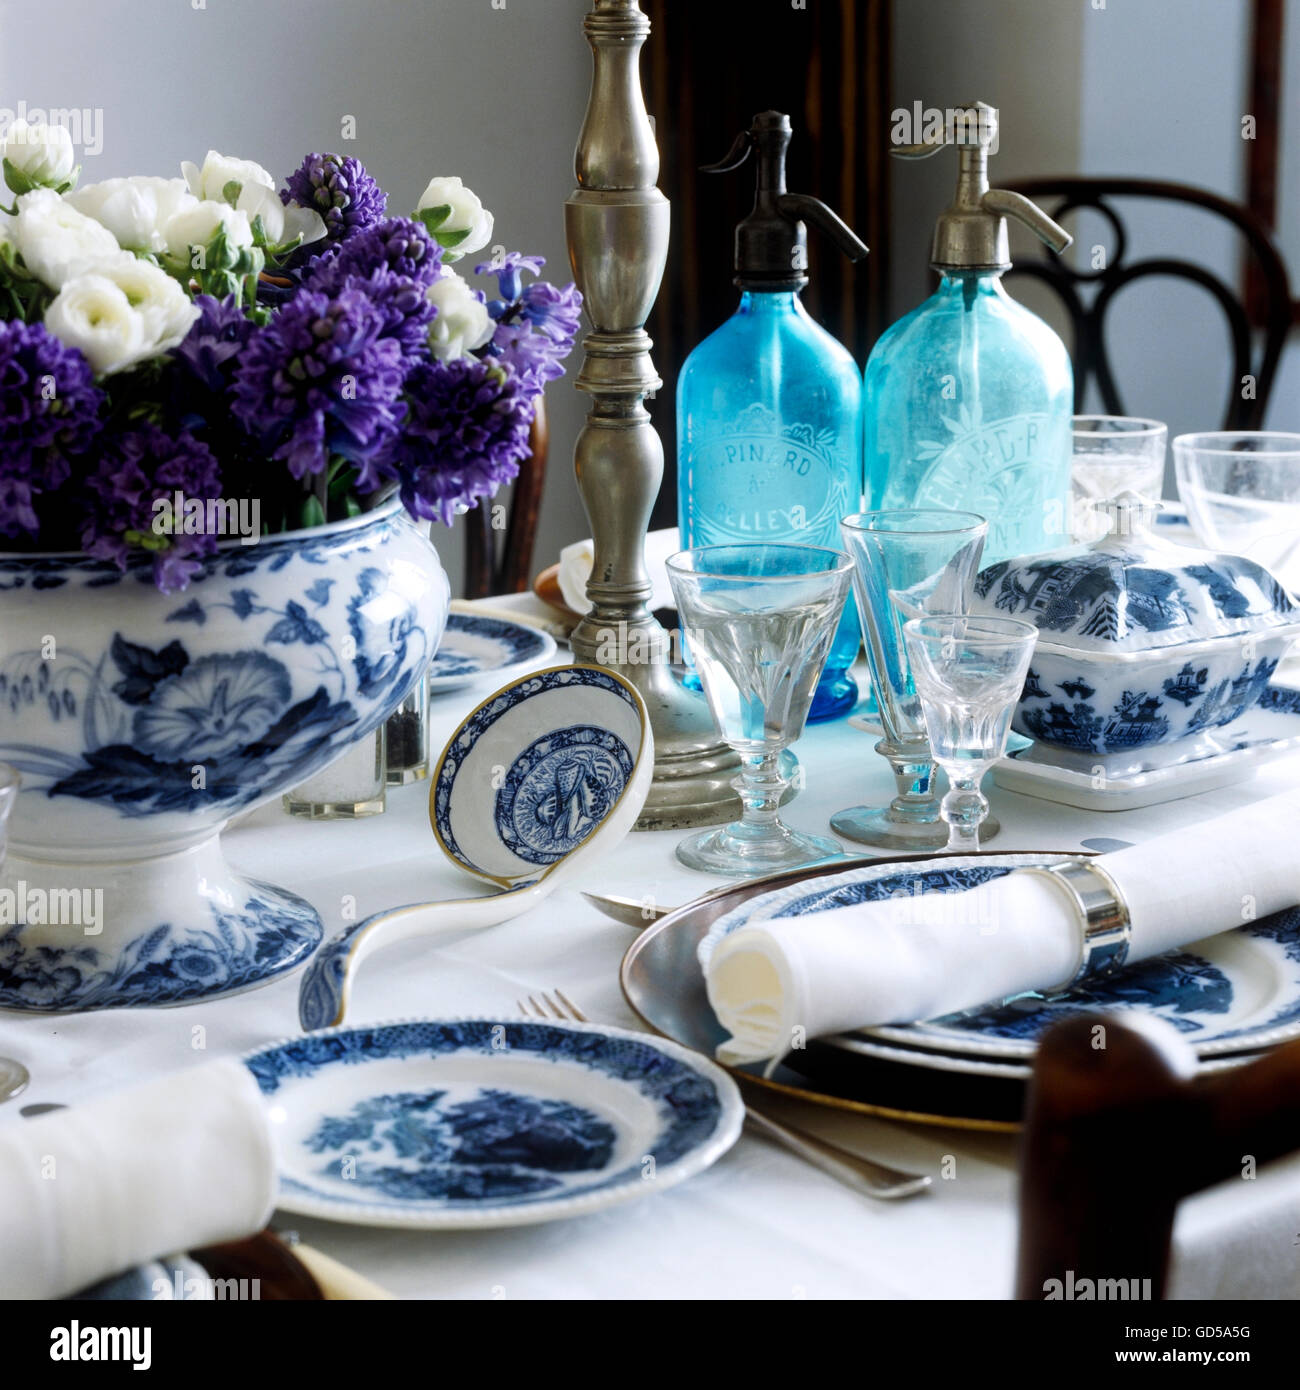 Blue willow china on set table Stock Photo